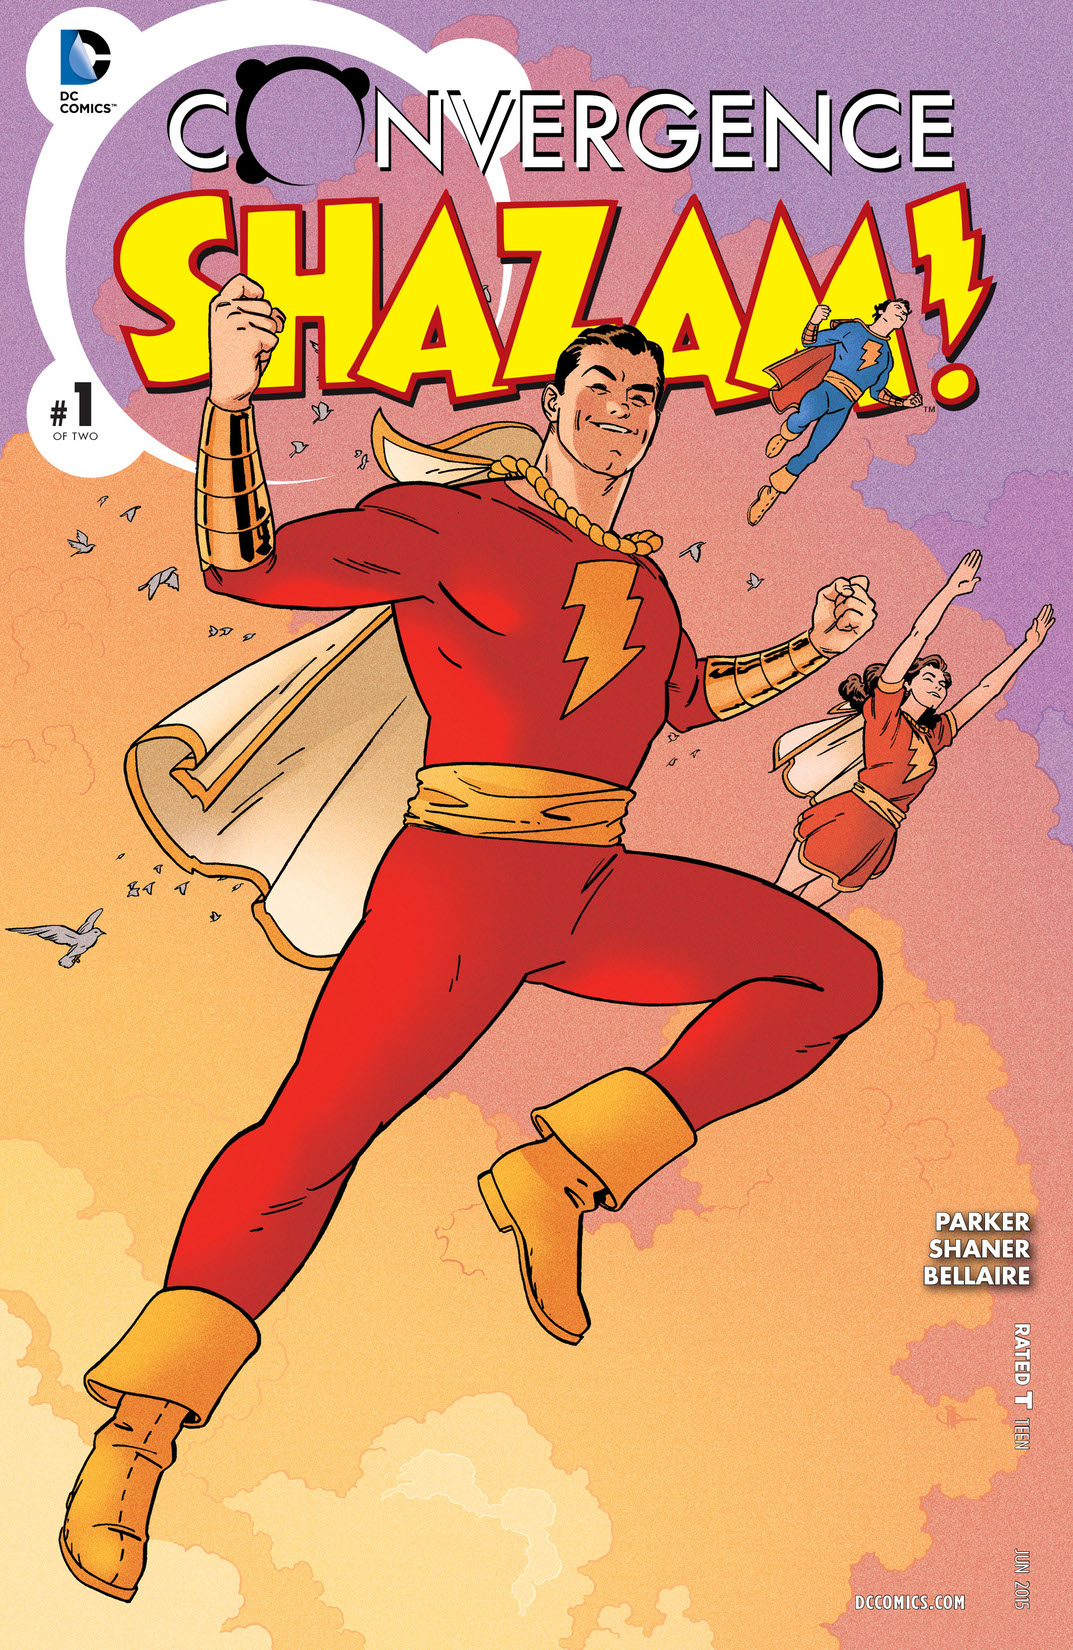 Convergence: Shazam! #1 preview images